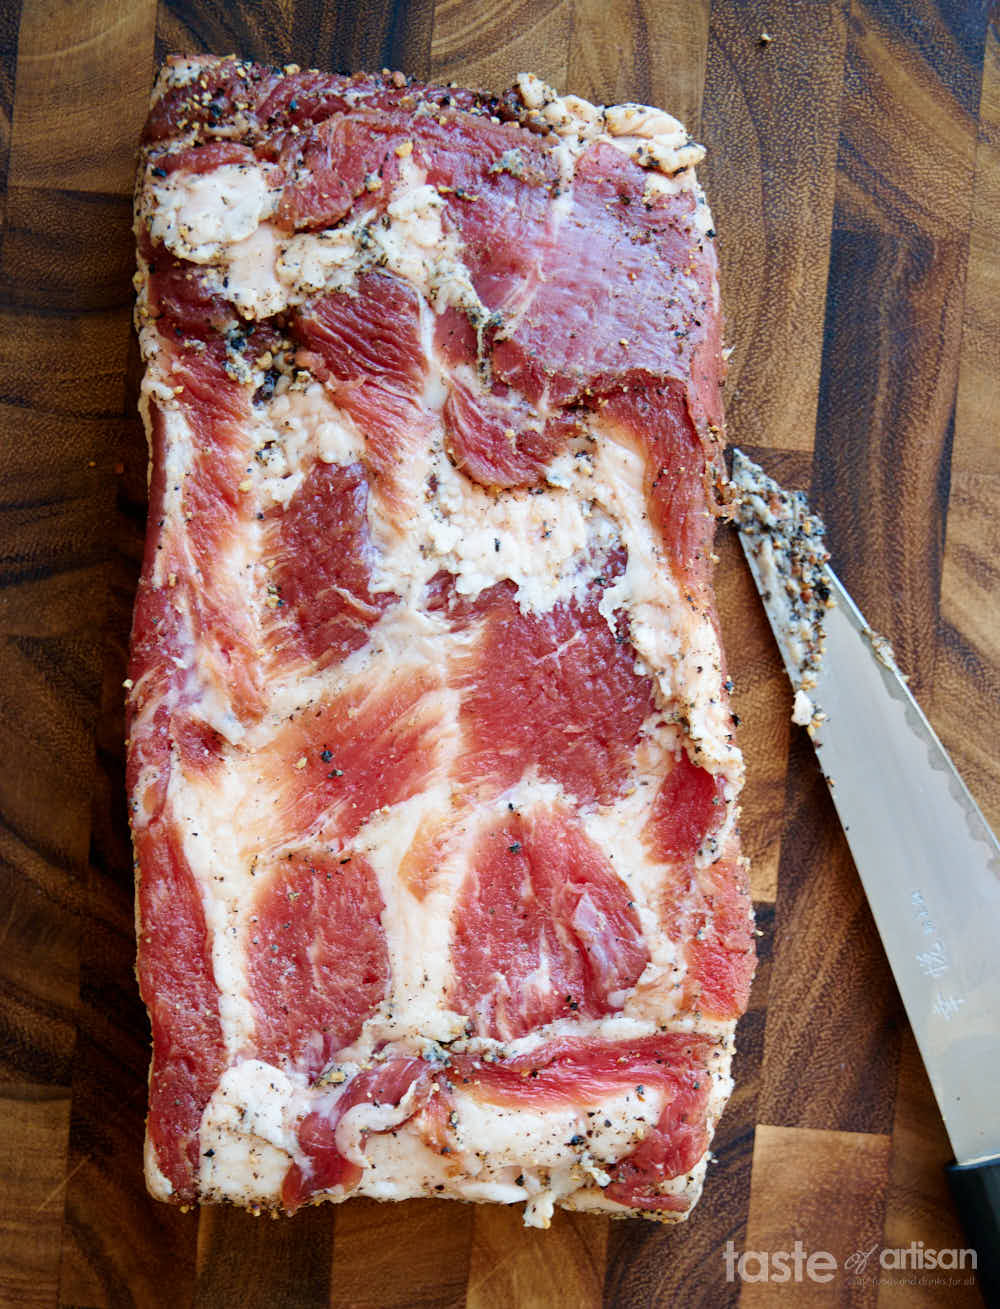 Scraping excess seasonings off cured bacon.